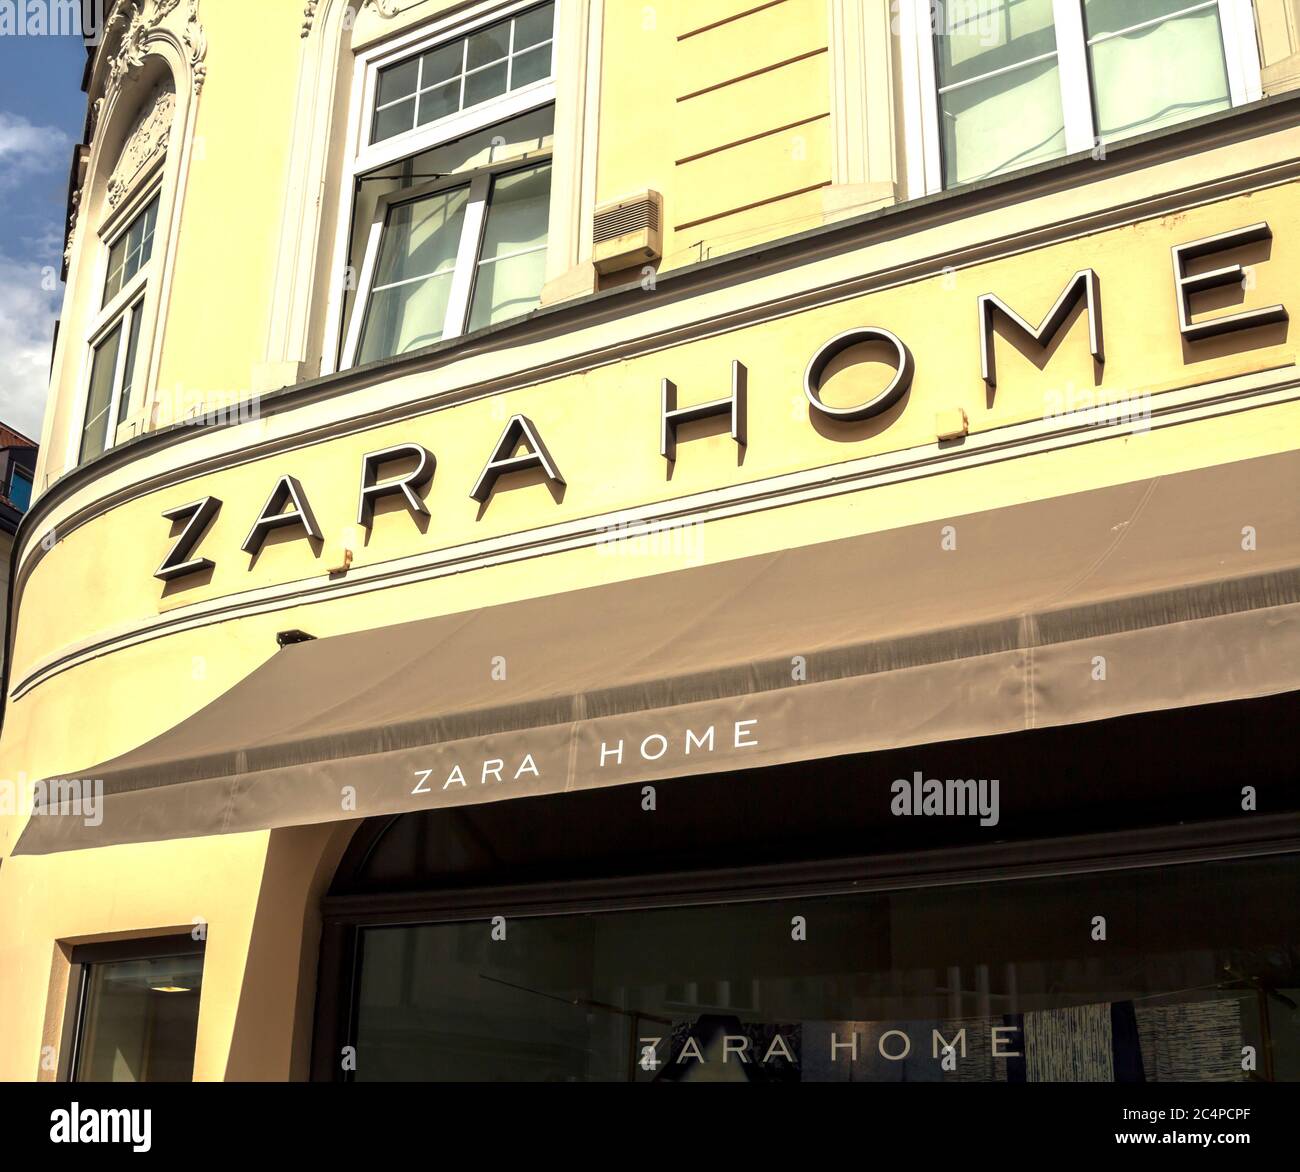 Zara Munich High Resolution Stock Photography and Images - Alamy